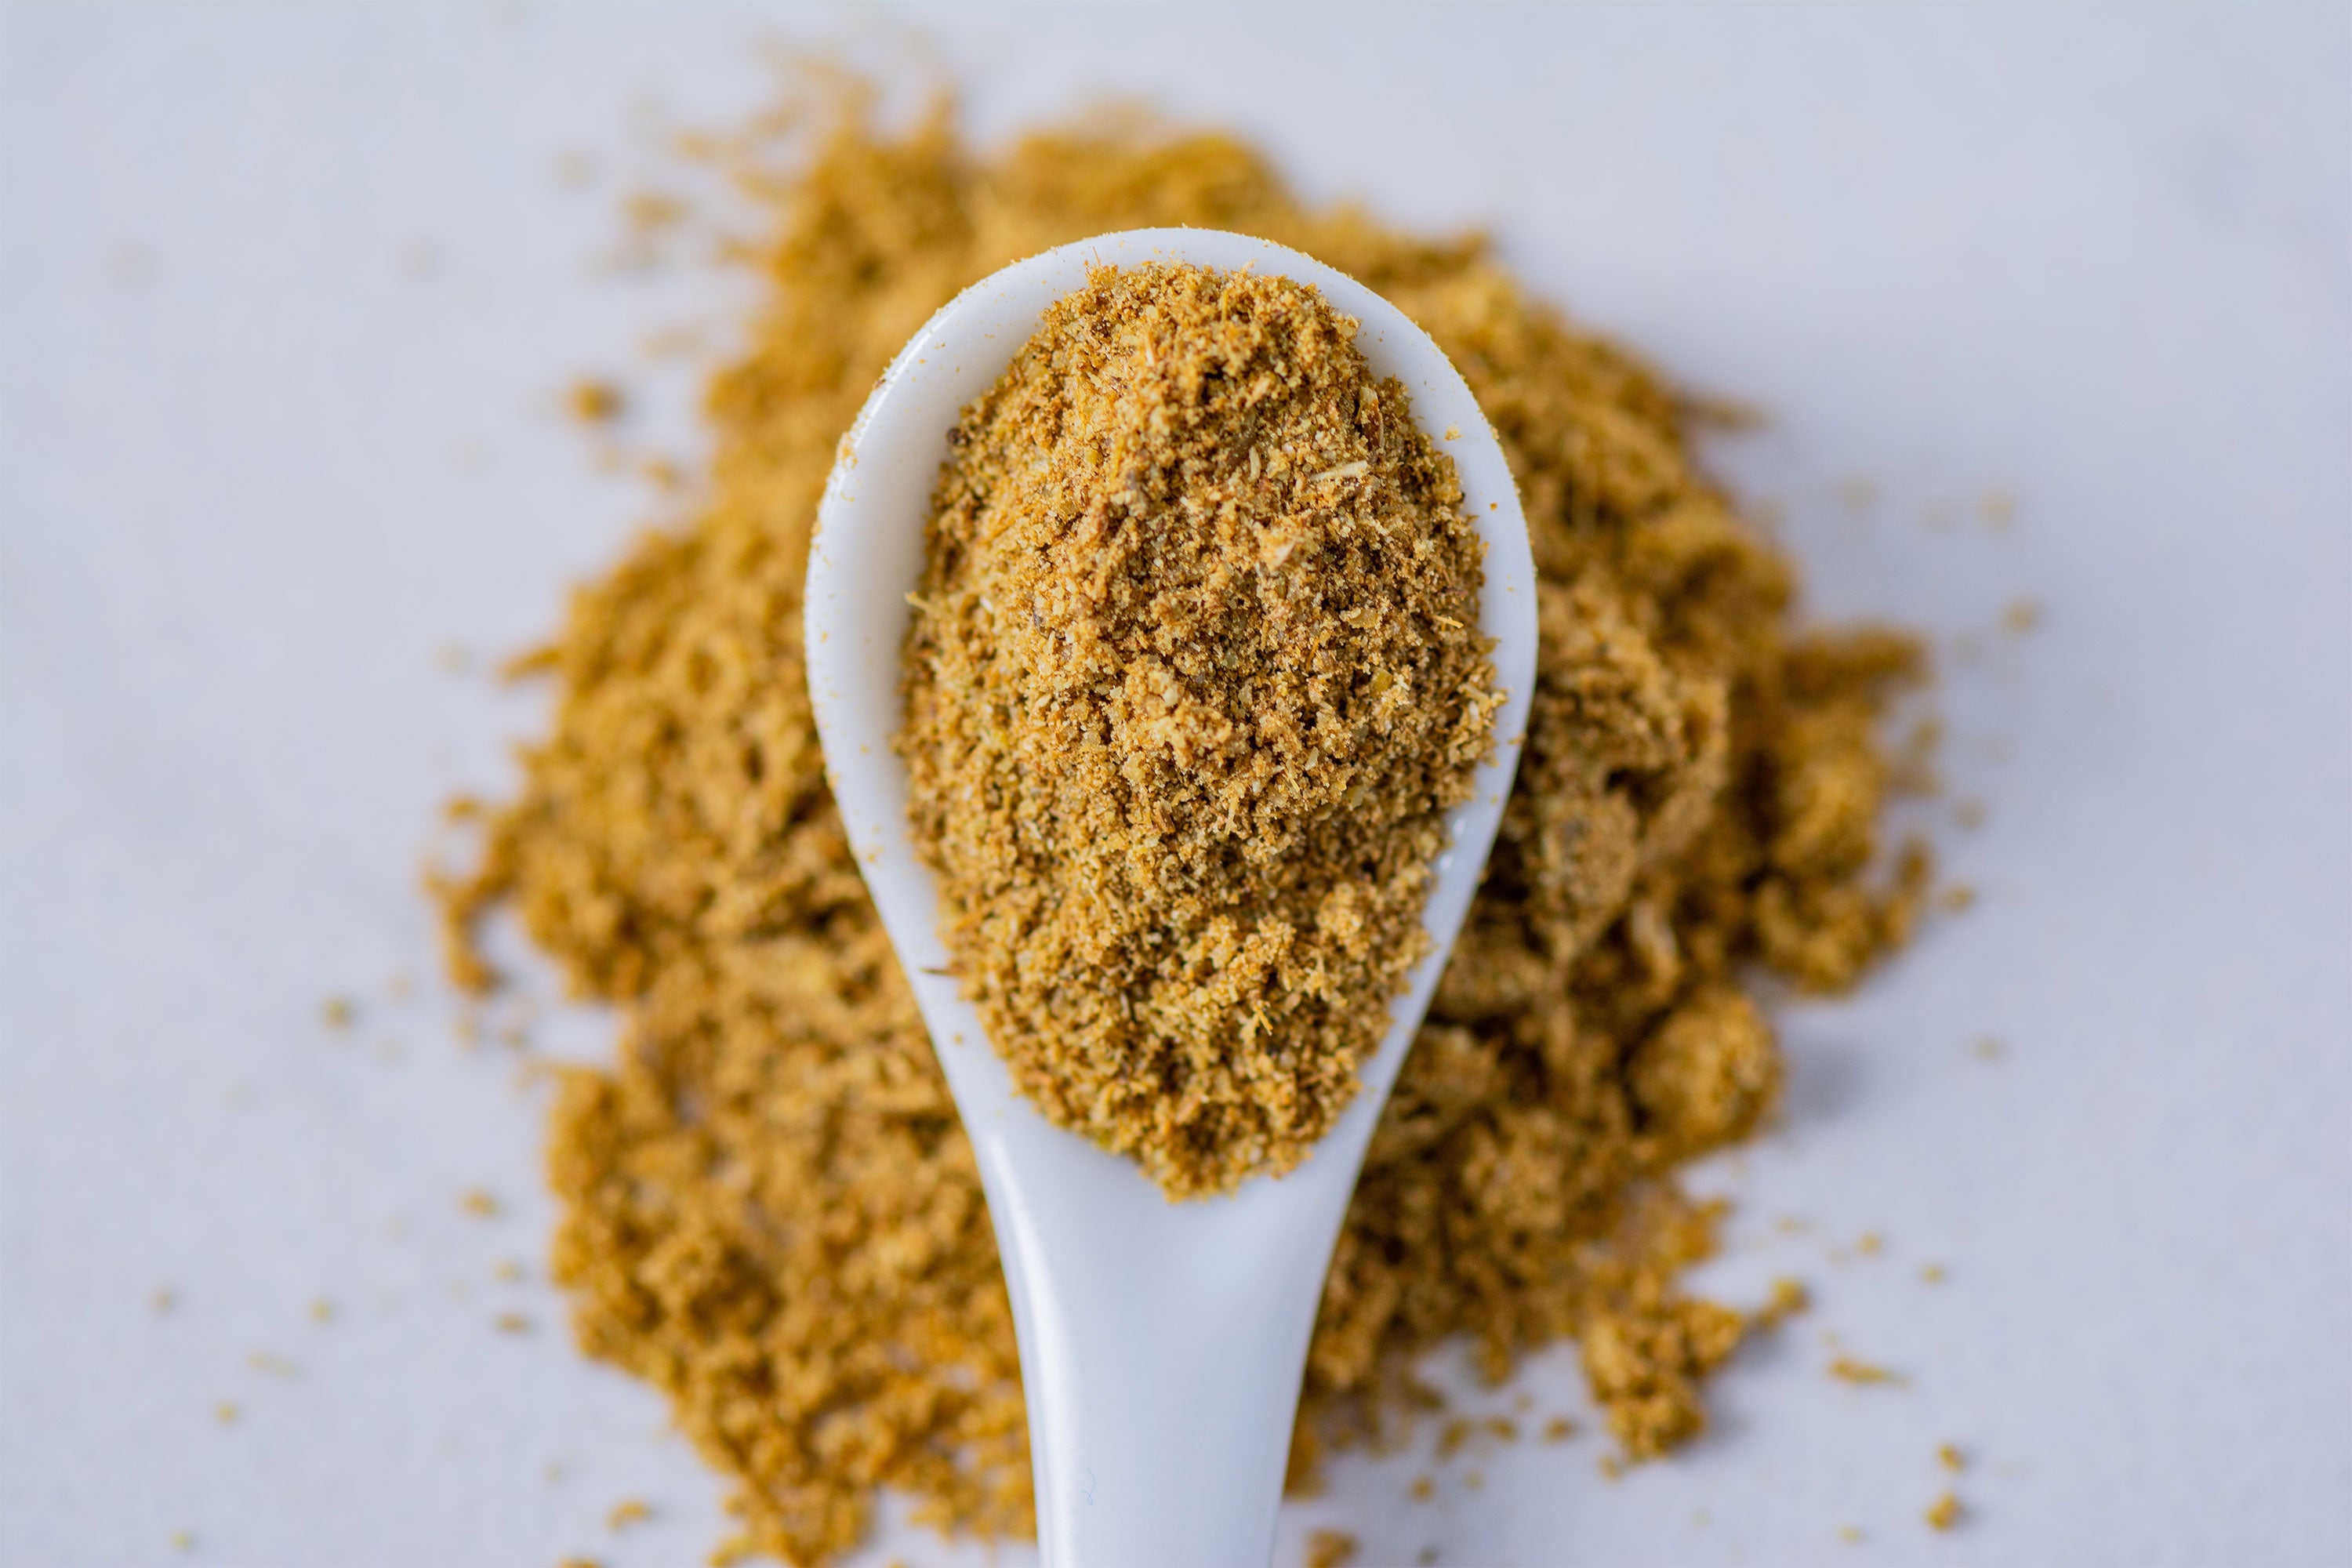 Spoon with ground cumin on neutral background